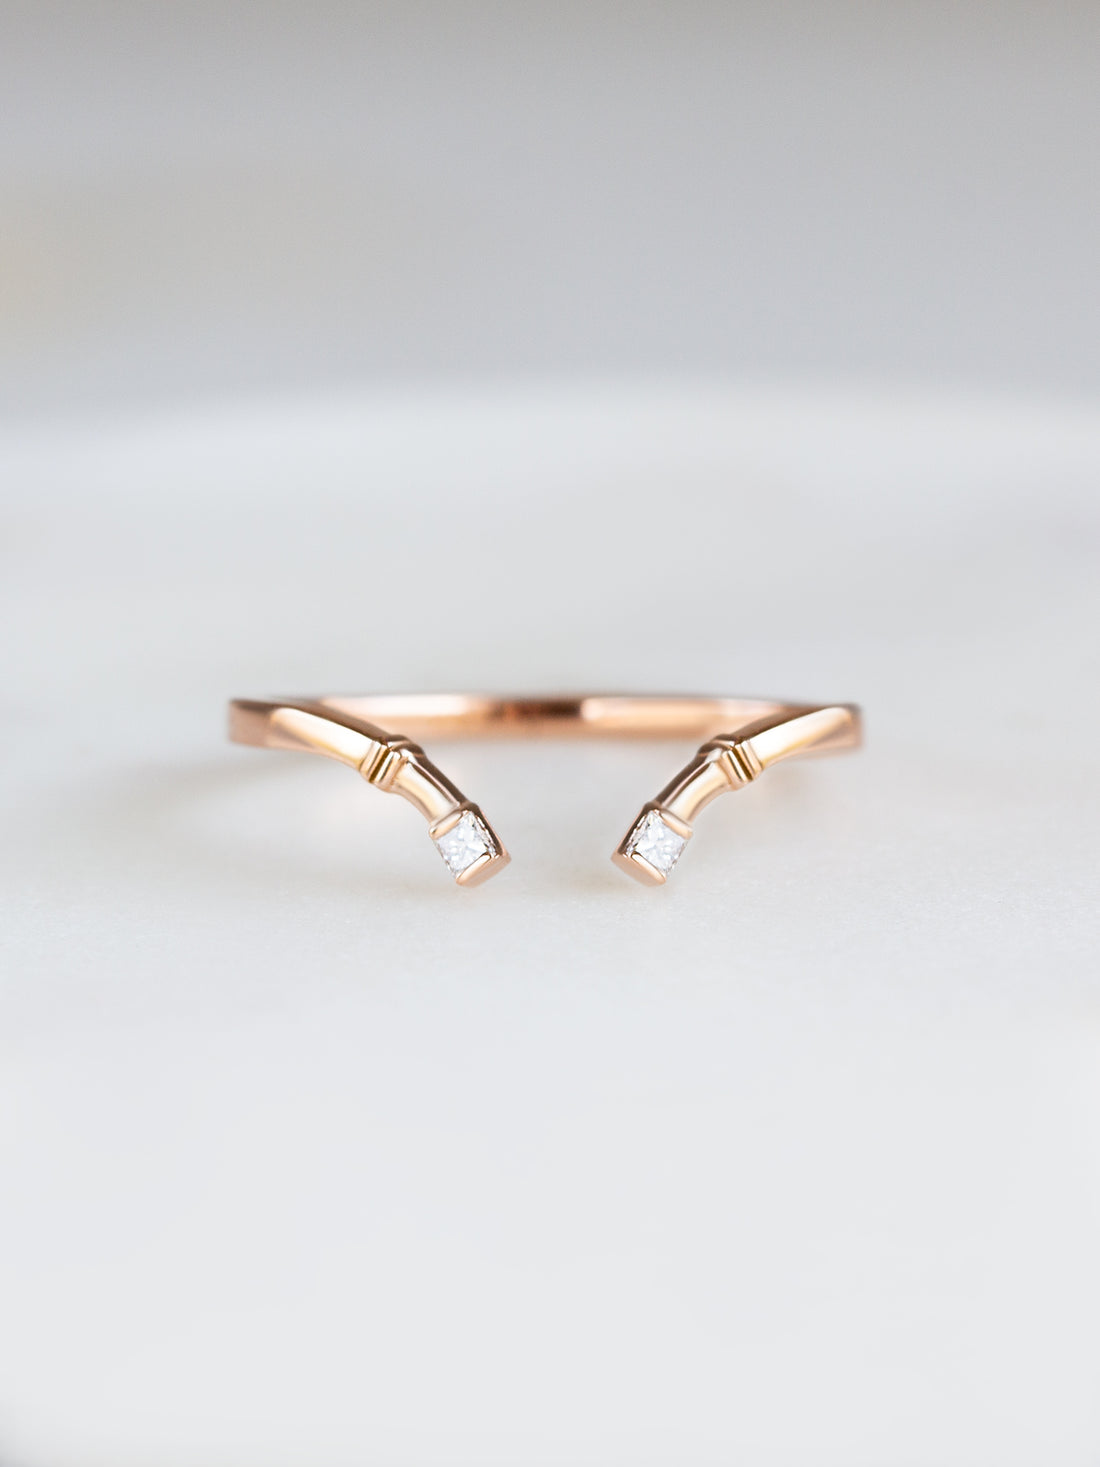 Hiddenspace jewelry open band fine jewelry 14k gold ring stacking ring diamond band engagement band unique stacking rings architectural design art deco fine jewelry vintage ring